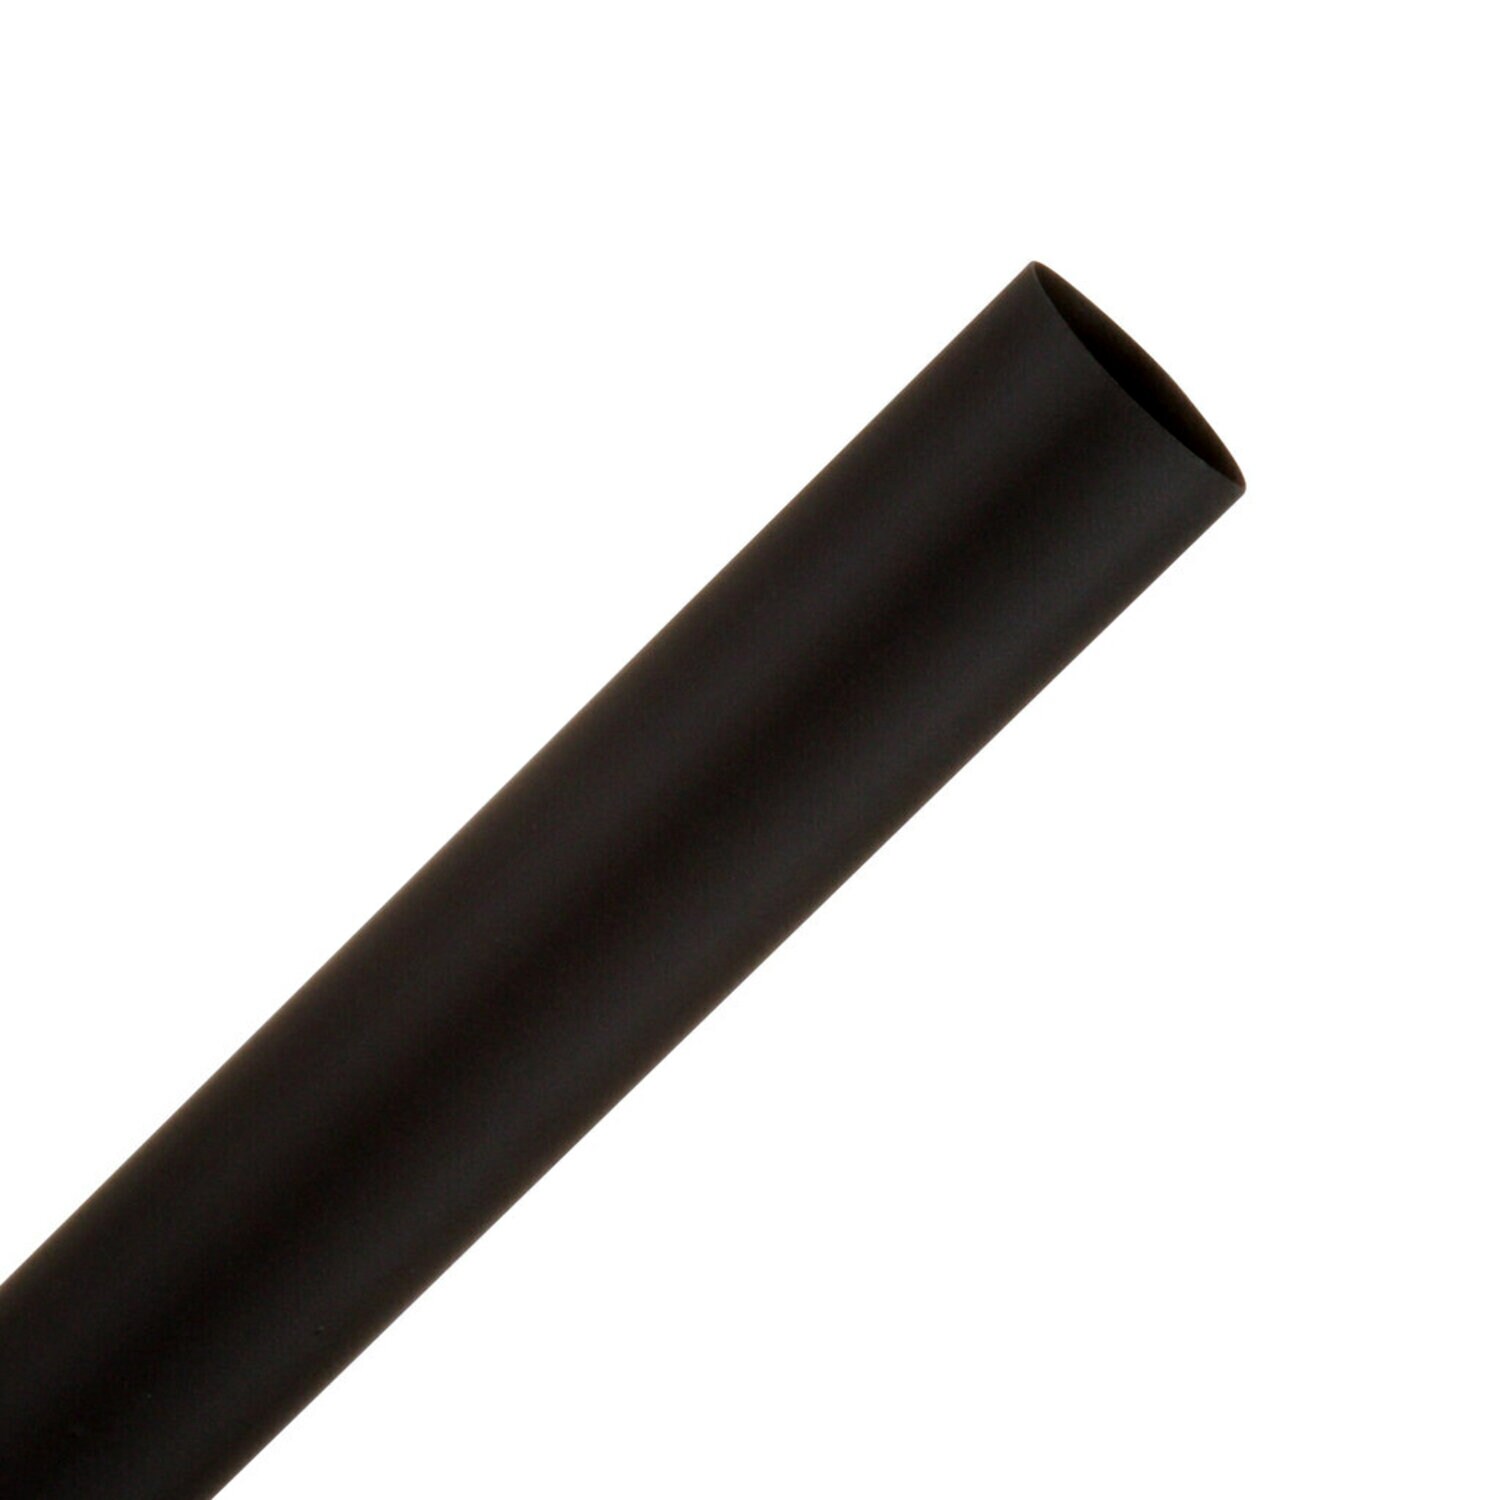 7000133508 - 3M Heat Shrink Thin-Wall Tubing FP-301-1/2-48"-Black-12 Pcs, 48 in
Length sticks, 12 pieces/case